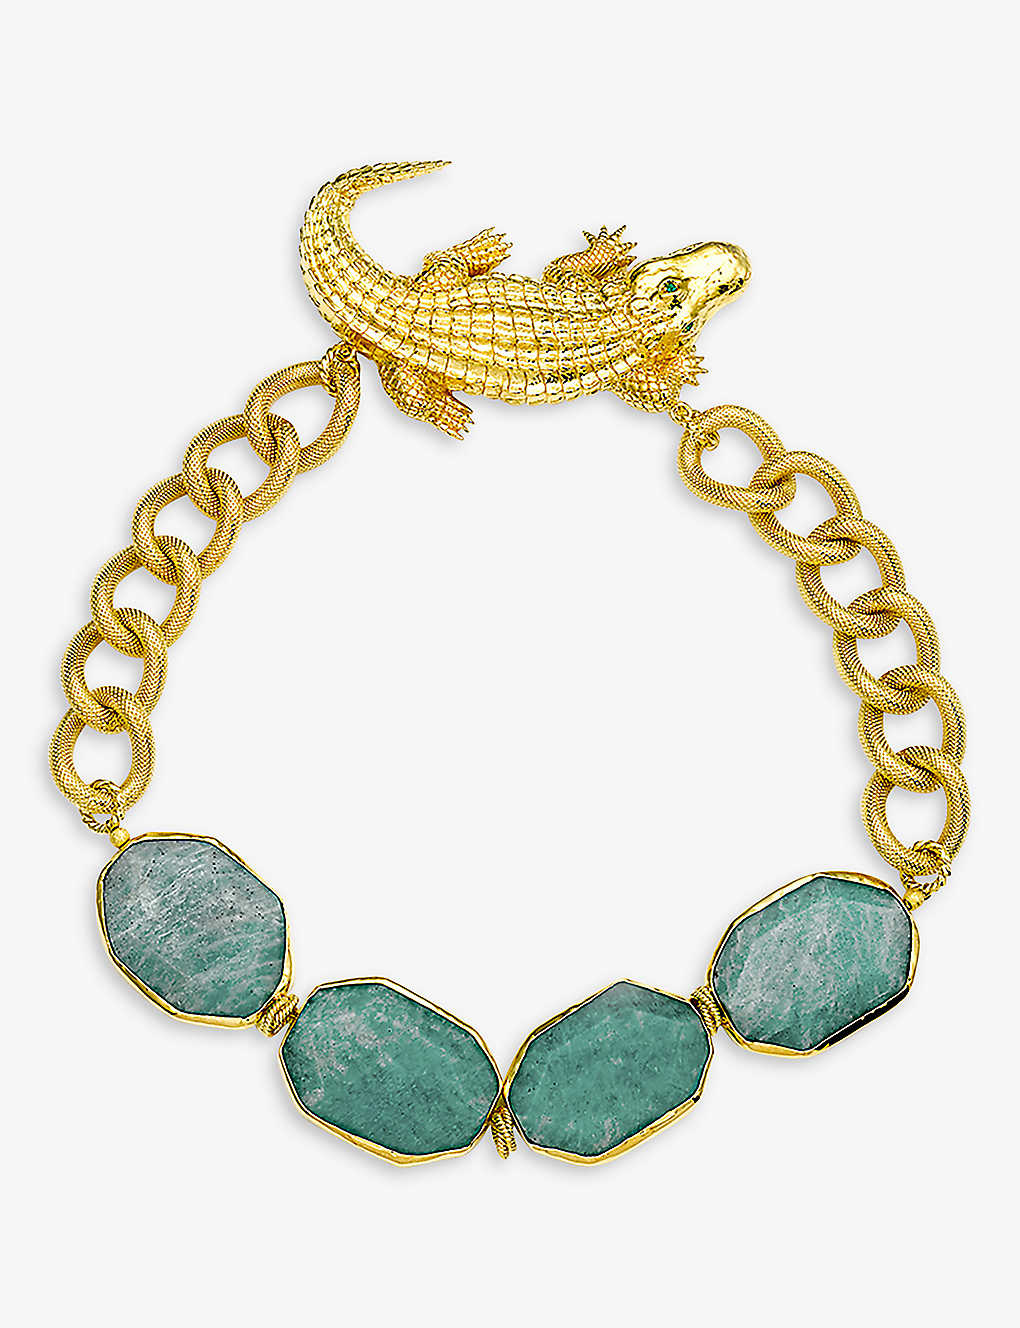 La Maison Couture Samantha Siu Eye-shine 18ct Yellow-gold Plated Sterling-silver, Emerald And Amazonite Necklace